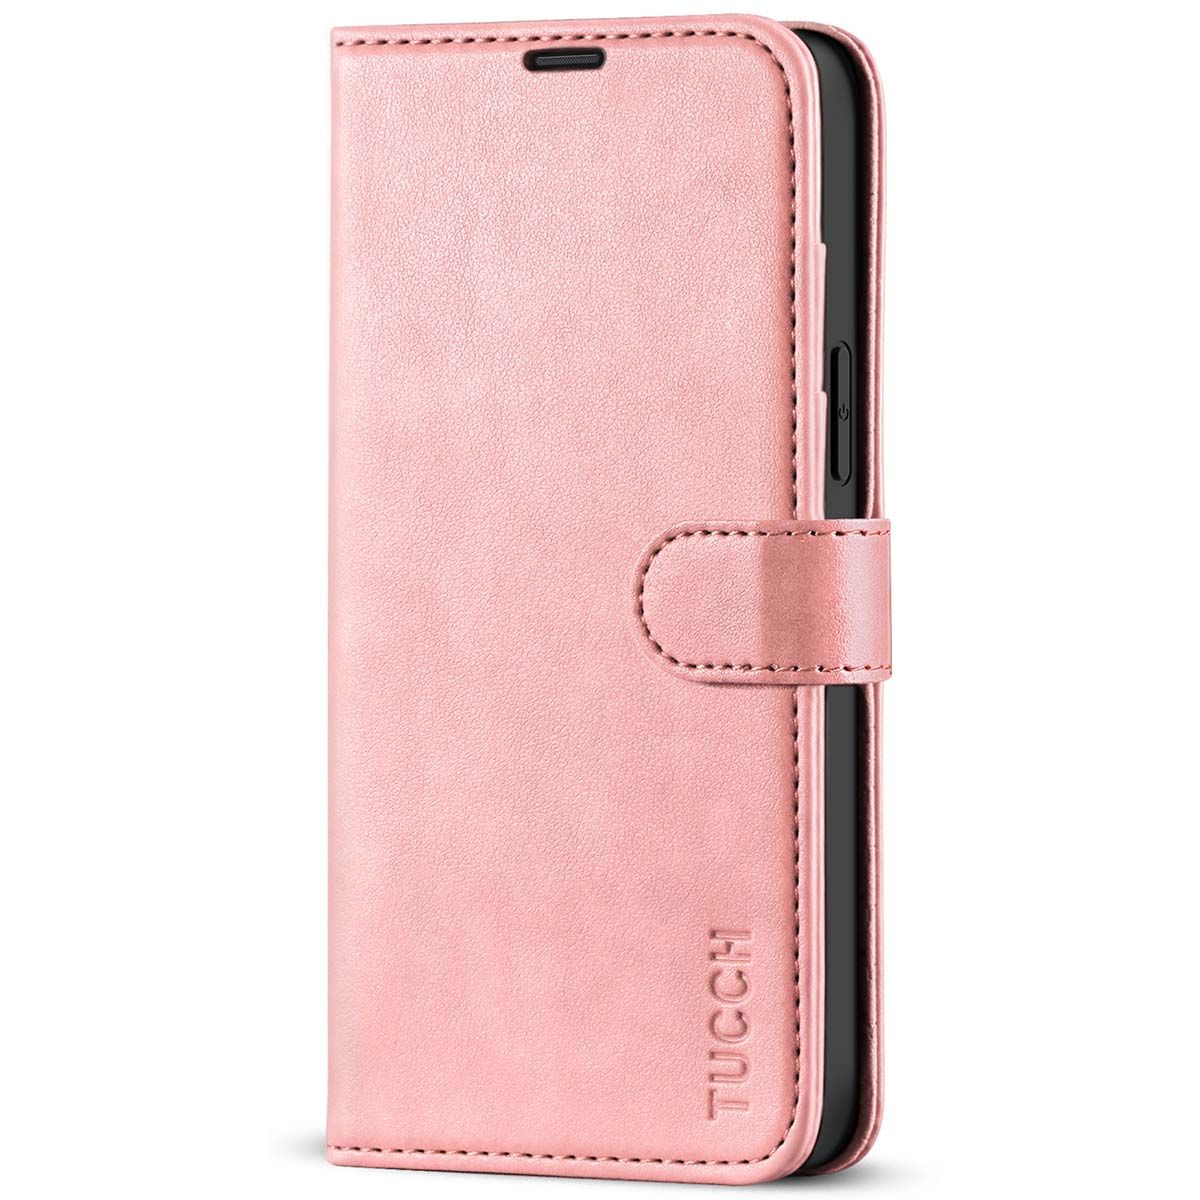 Phone Case for iPhone 13 Premium Leather iPhone 13 Wallet Case with Card  Slot Kickstand Magnetic Closure Folio Flip Protective Case for iPhone 13/ iPhone 13 Pro/iPhone 13 Mini/iPhone 13 Pro Max 